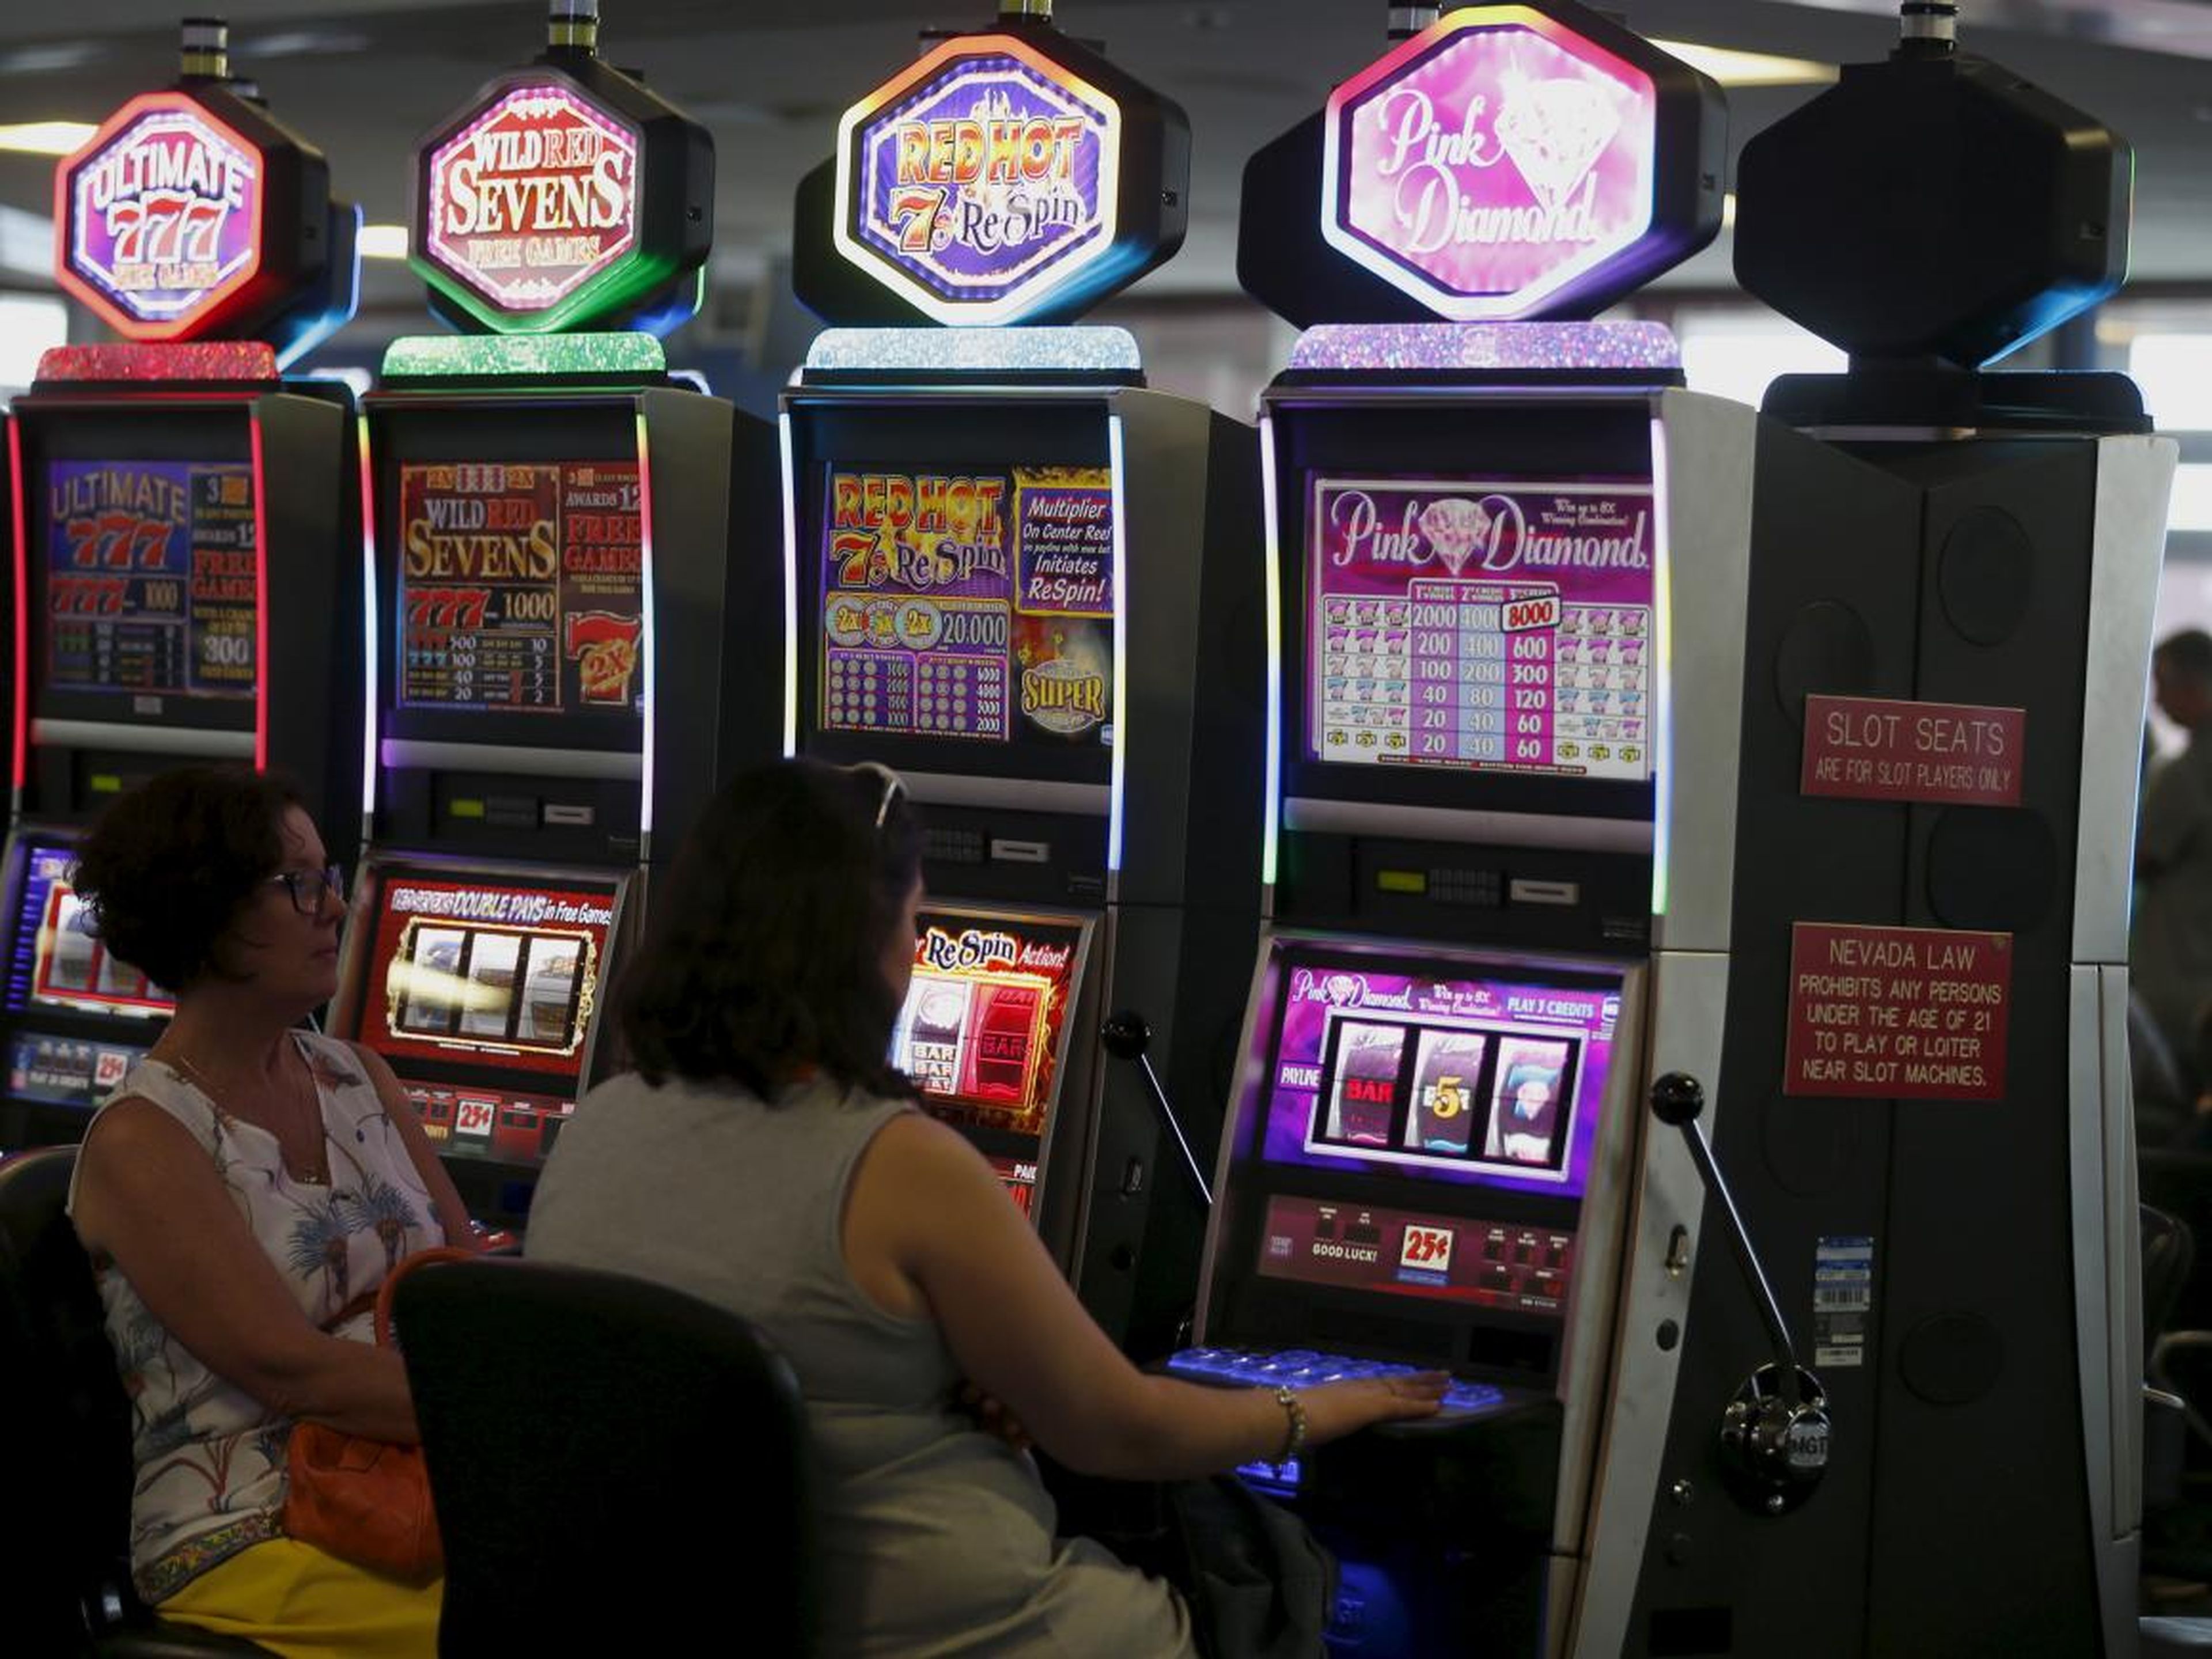 And, of course, it's hard to talk about Las Vegas without mentioning gambling.